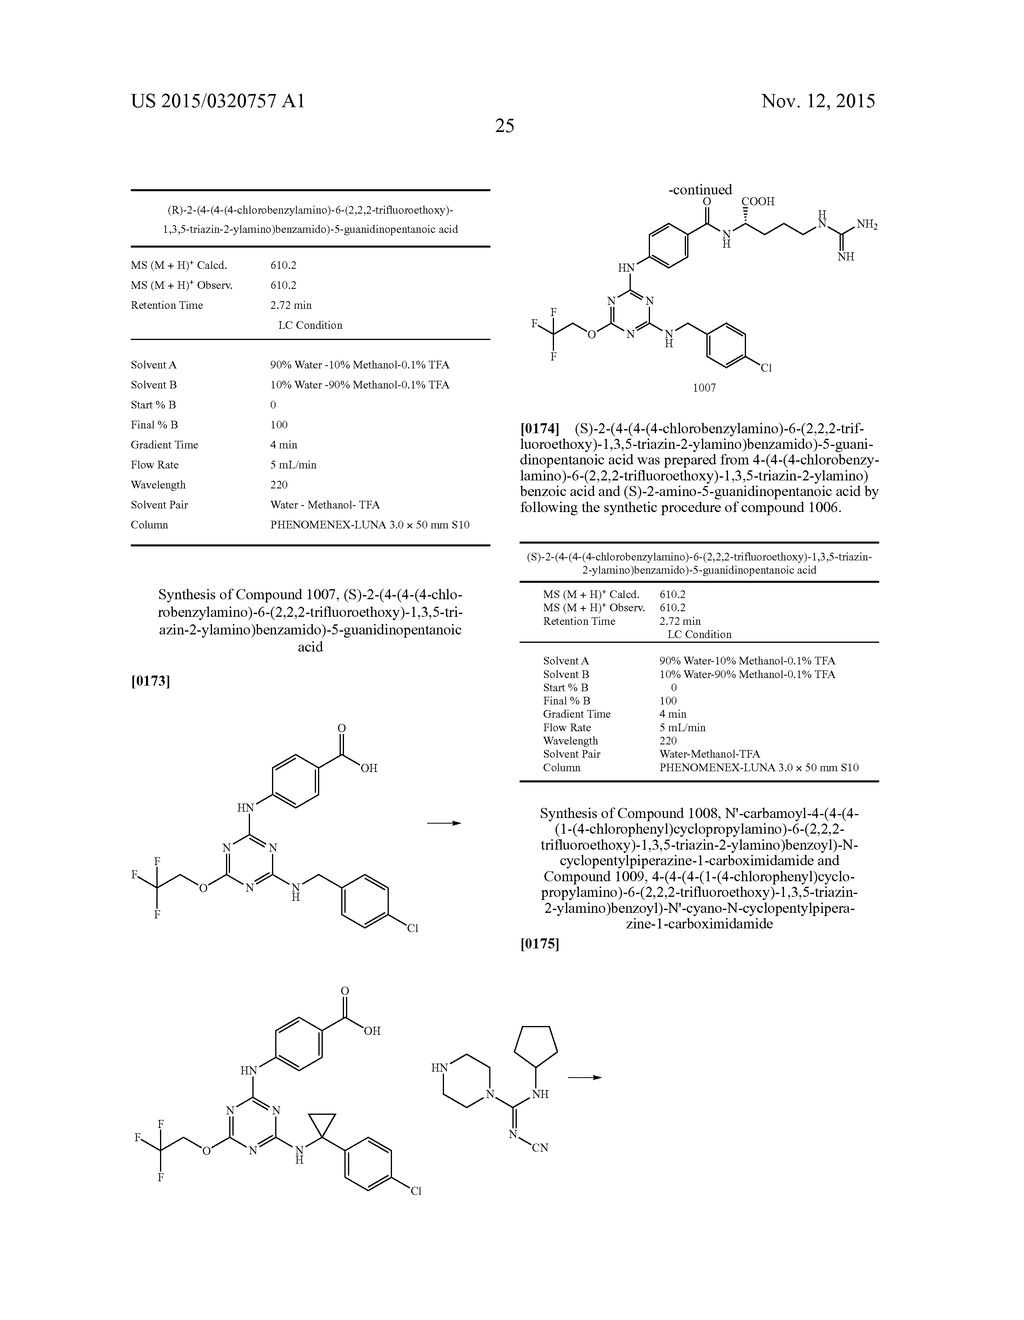 GUANIDINE DERIVATIVES FOR THE TREATMENT OF HEPATITIS C - diagram, schematic, and image 26